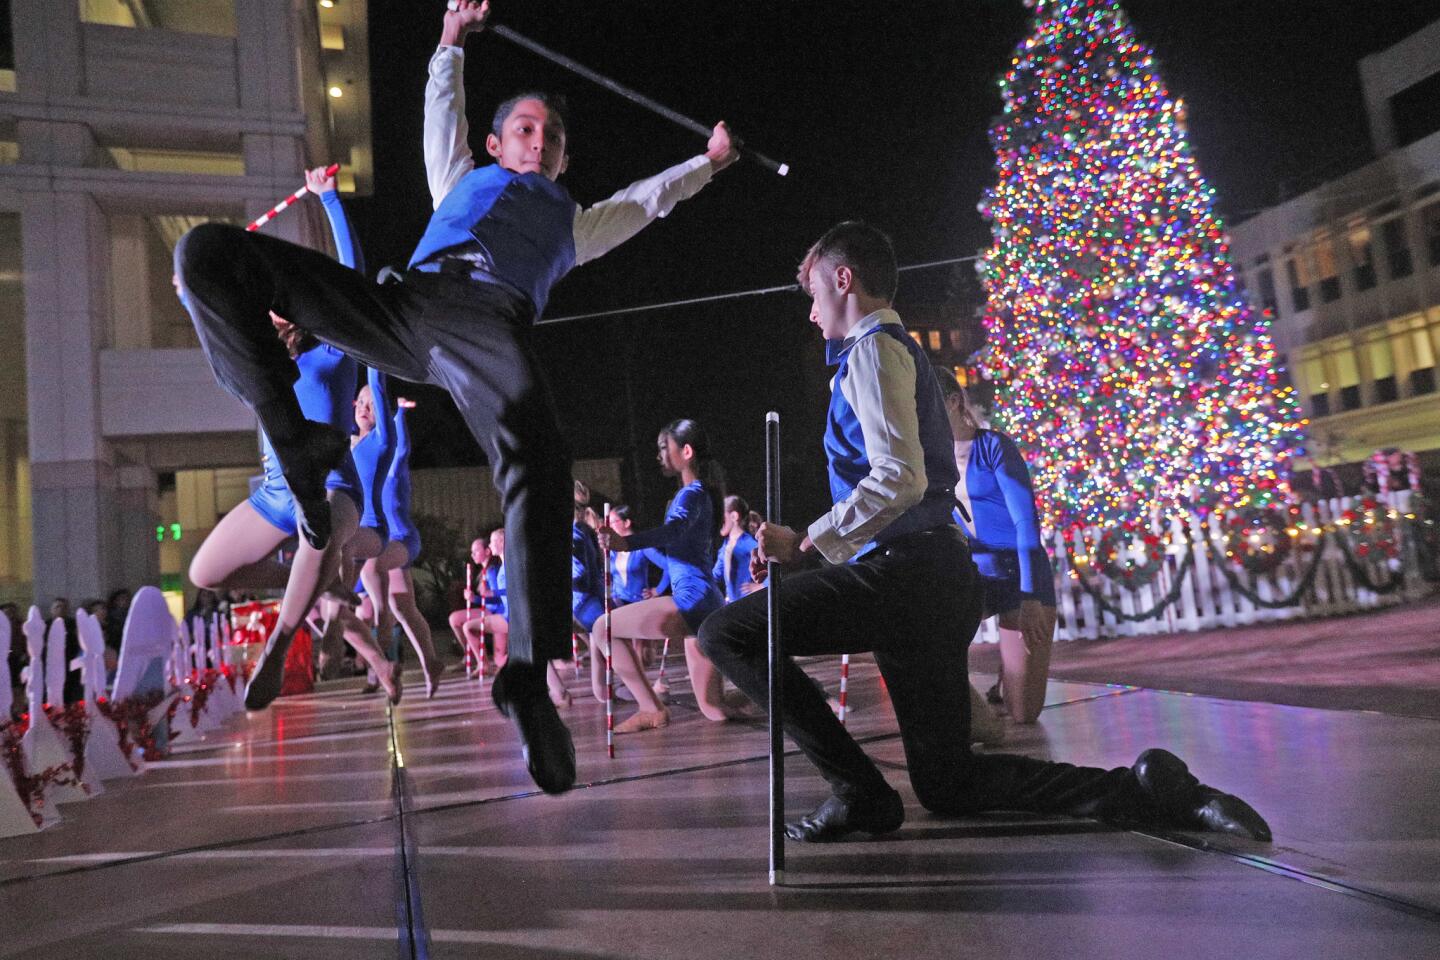 Performers with the Revolution Dance Company, from Montrose, dance at the Holiday Tree Lighting Ceremony and Cram-A-Classic Toy Drive at the Glendale City Hall Perkins Plaza on Monday, December 3, 2018. Santa, a toy drive, and the 1966 holiday classic "How the Grinch Stole Christmas!" were all going on.